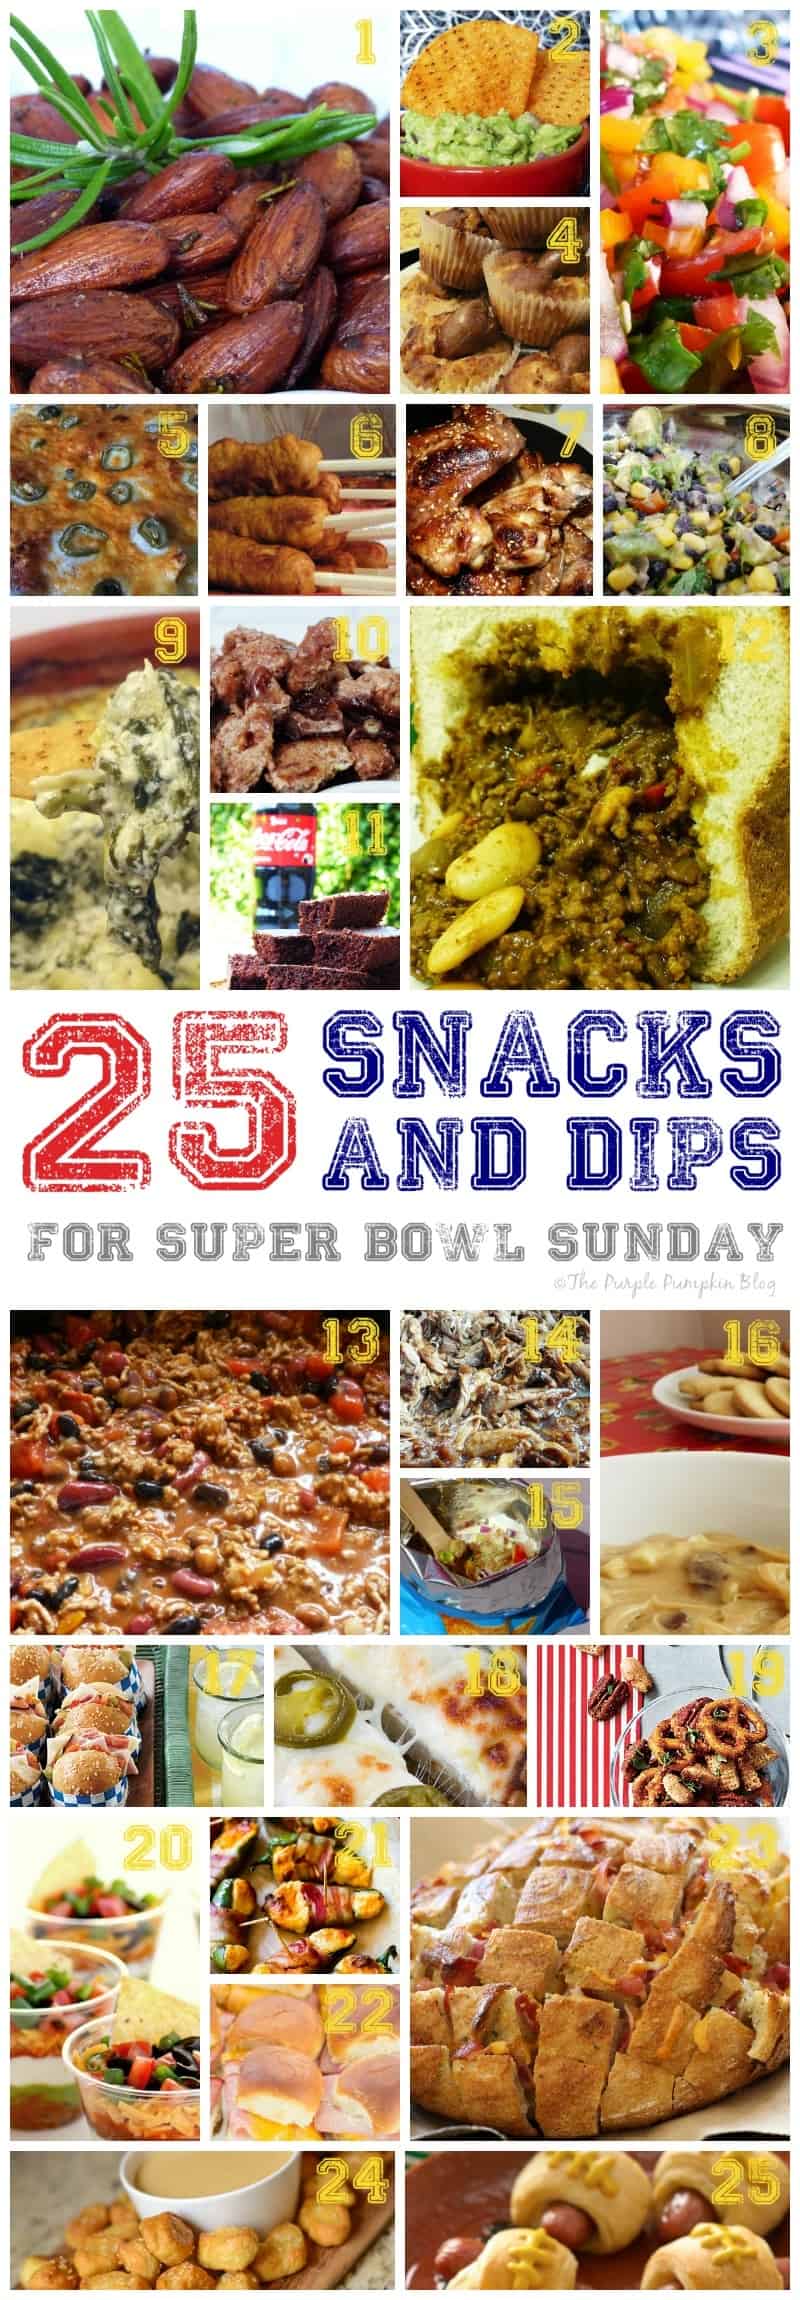 25 Snacks and Dips for Super Bowl Sunday